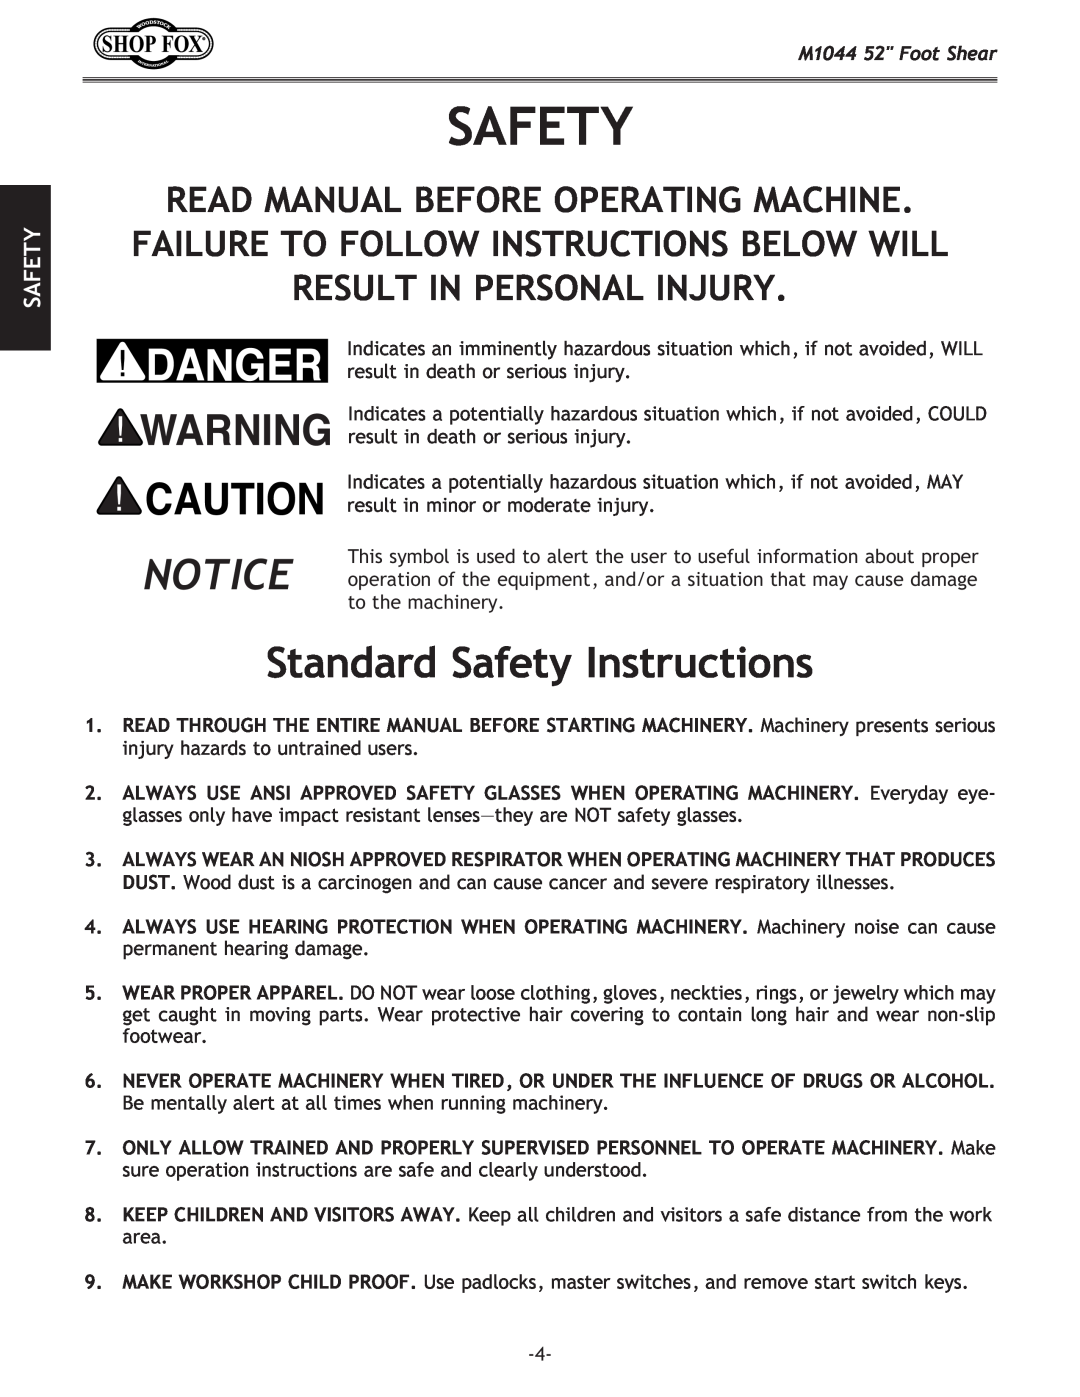 Woodstock manual Standard Safety Instructions, M1044 52 Foot Shear 